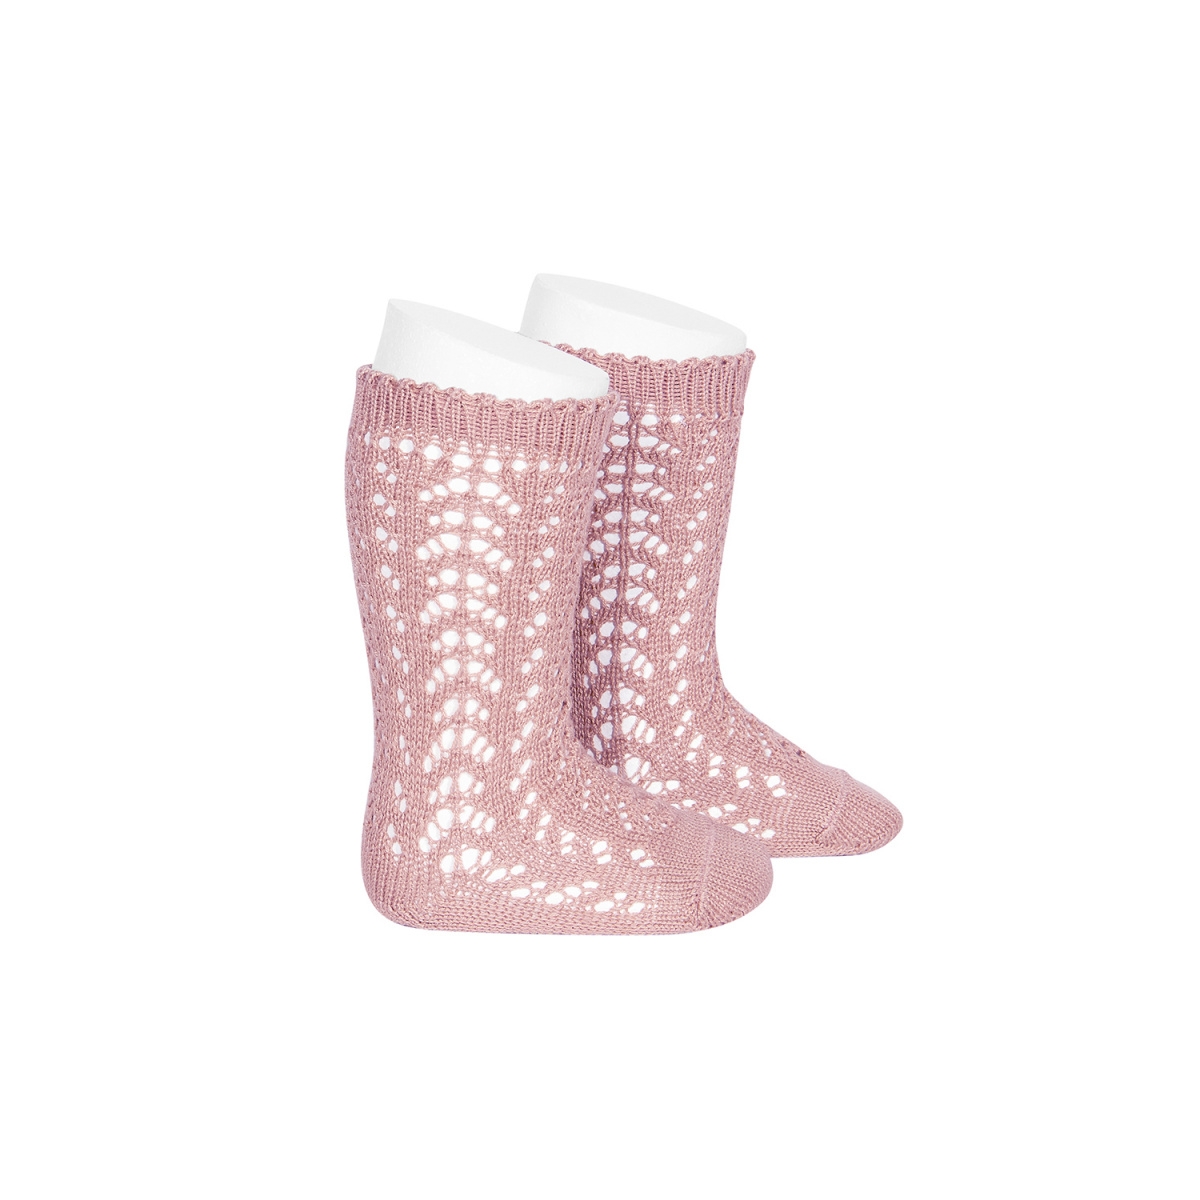 Condor Cotton Knee High Sock pale pink 2.